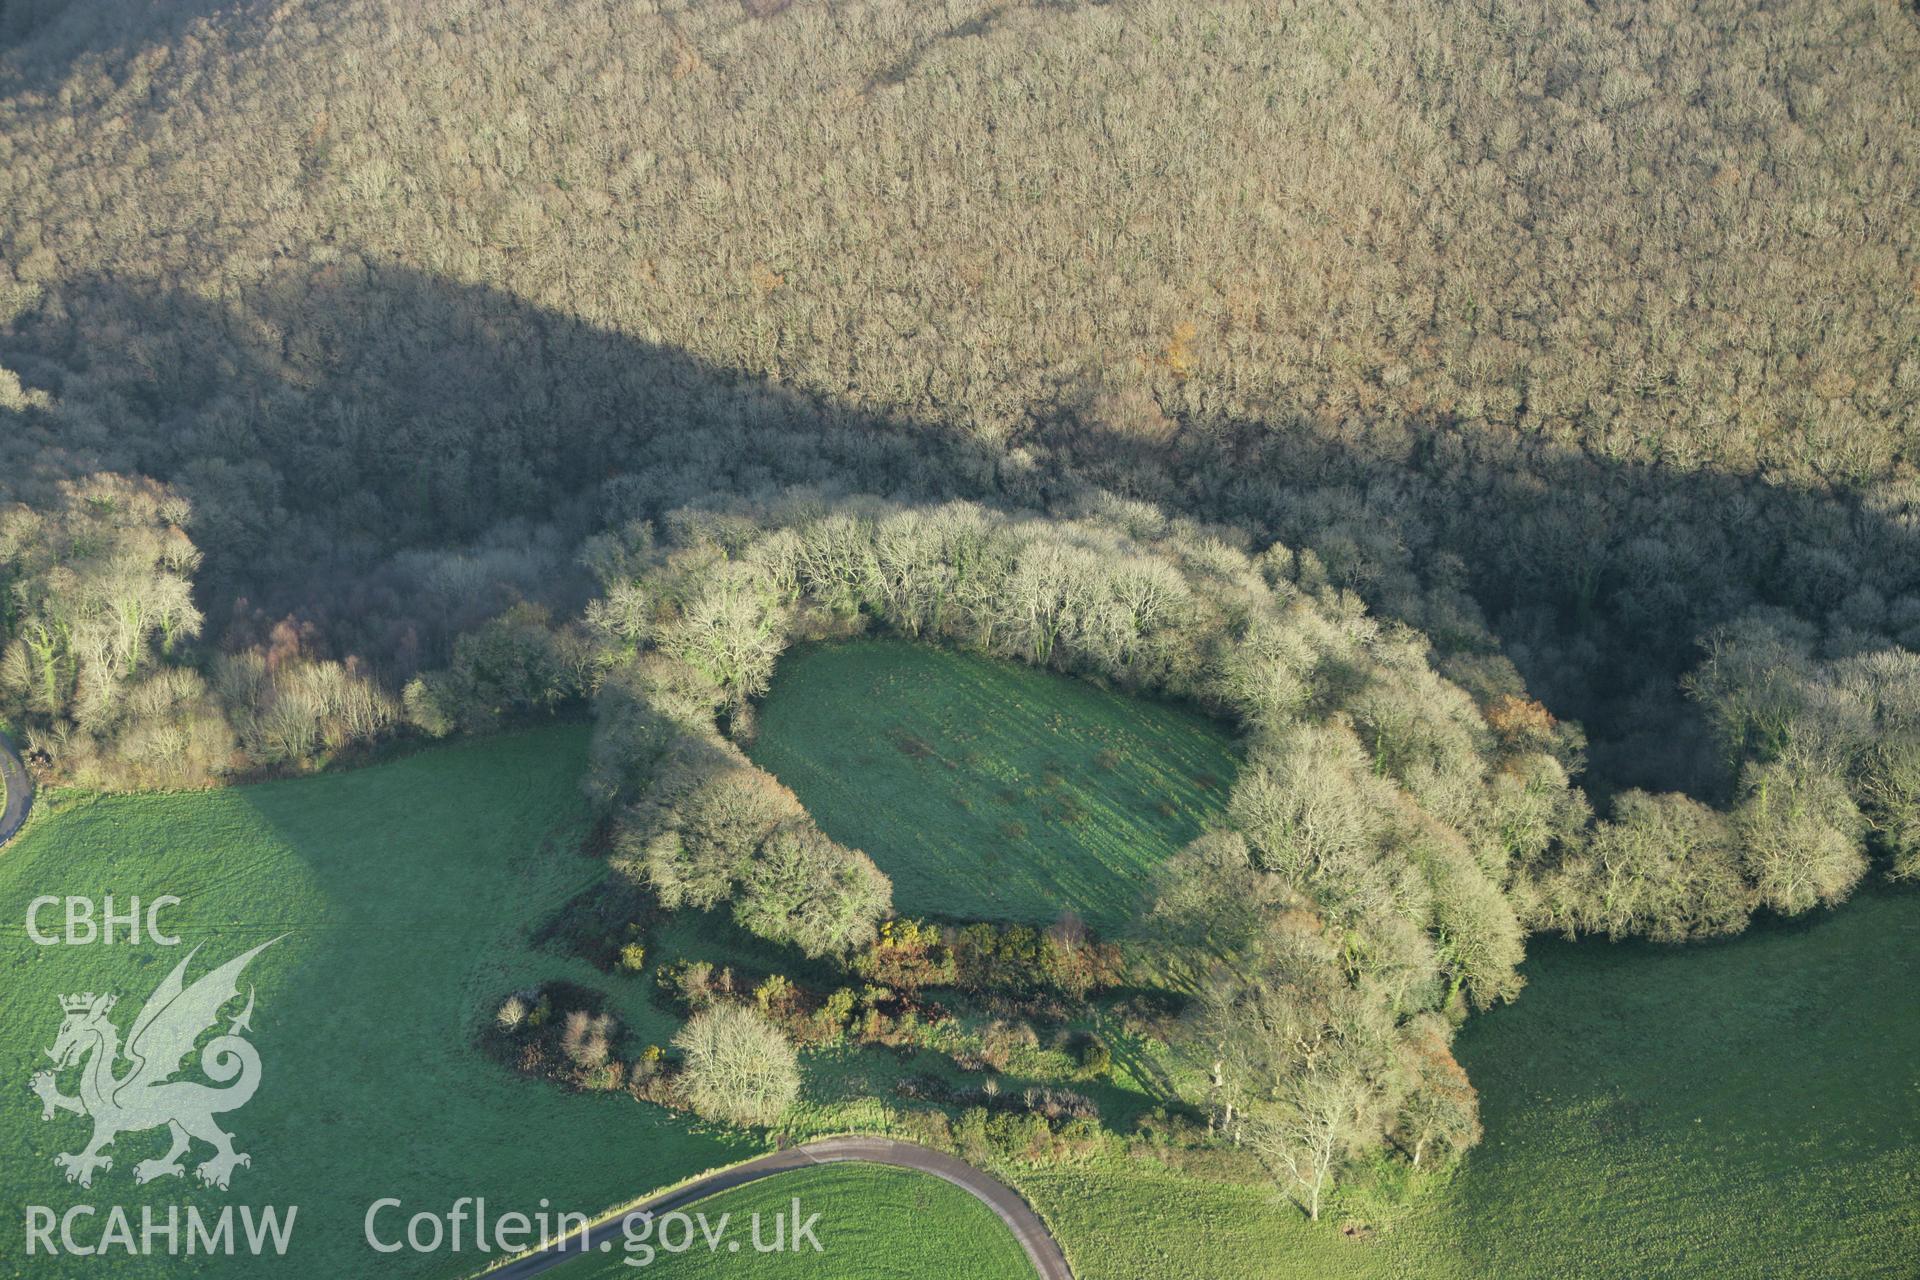 RCAHMW colour oblique photograph of Castell Pen-y-Coed;Possible site of battle of Pencoed or Pencon. Taken by Toby Driver on 29/11/2007.